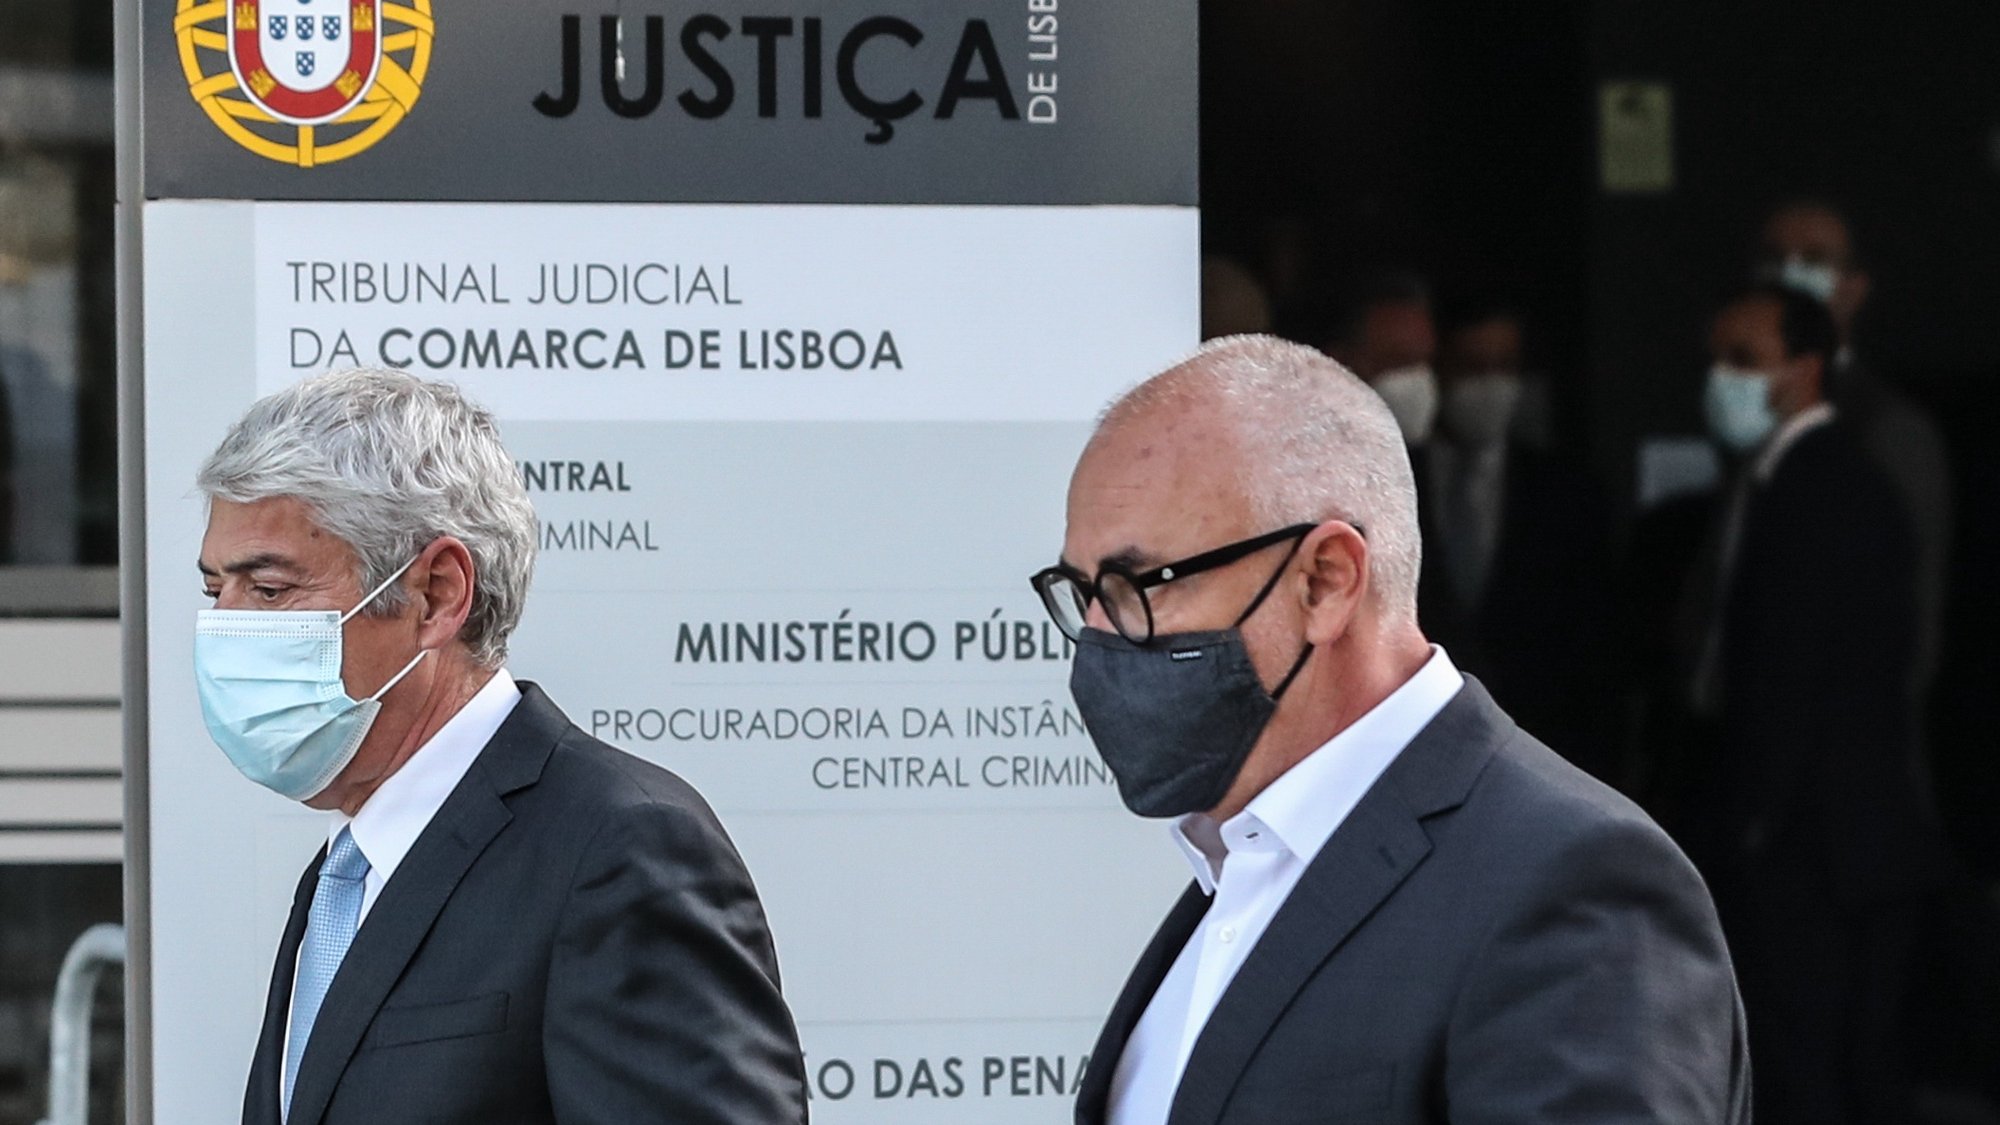 The defendant and former Prime Minister Jose Socrates (L) and his lawyer Pedro Delille (R) leave the court after the reading of the instructional decision of the high-profile corruption case known as Operation Marques, at the Justice Campus in Lisbon, Portugal, 09 April 2021. Operation Marques has 28 defendants - 19 people and 9 companies - including former Prime Minister Jose Socrates, banker Ricardo Salgado, businessman and friend of Socrates Carlos Santos Silva, and senior executives of Portugal Telecom, and is related to crimes of active and passive corruption, money laundering, document forgery, and tax fraud.  ANTÓNIO COTRIM/LUSA